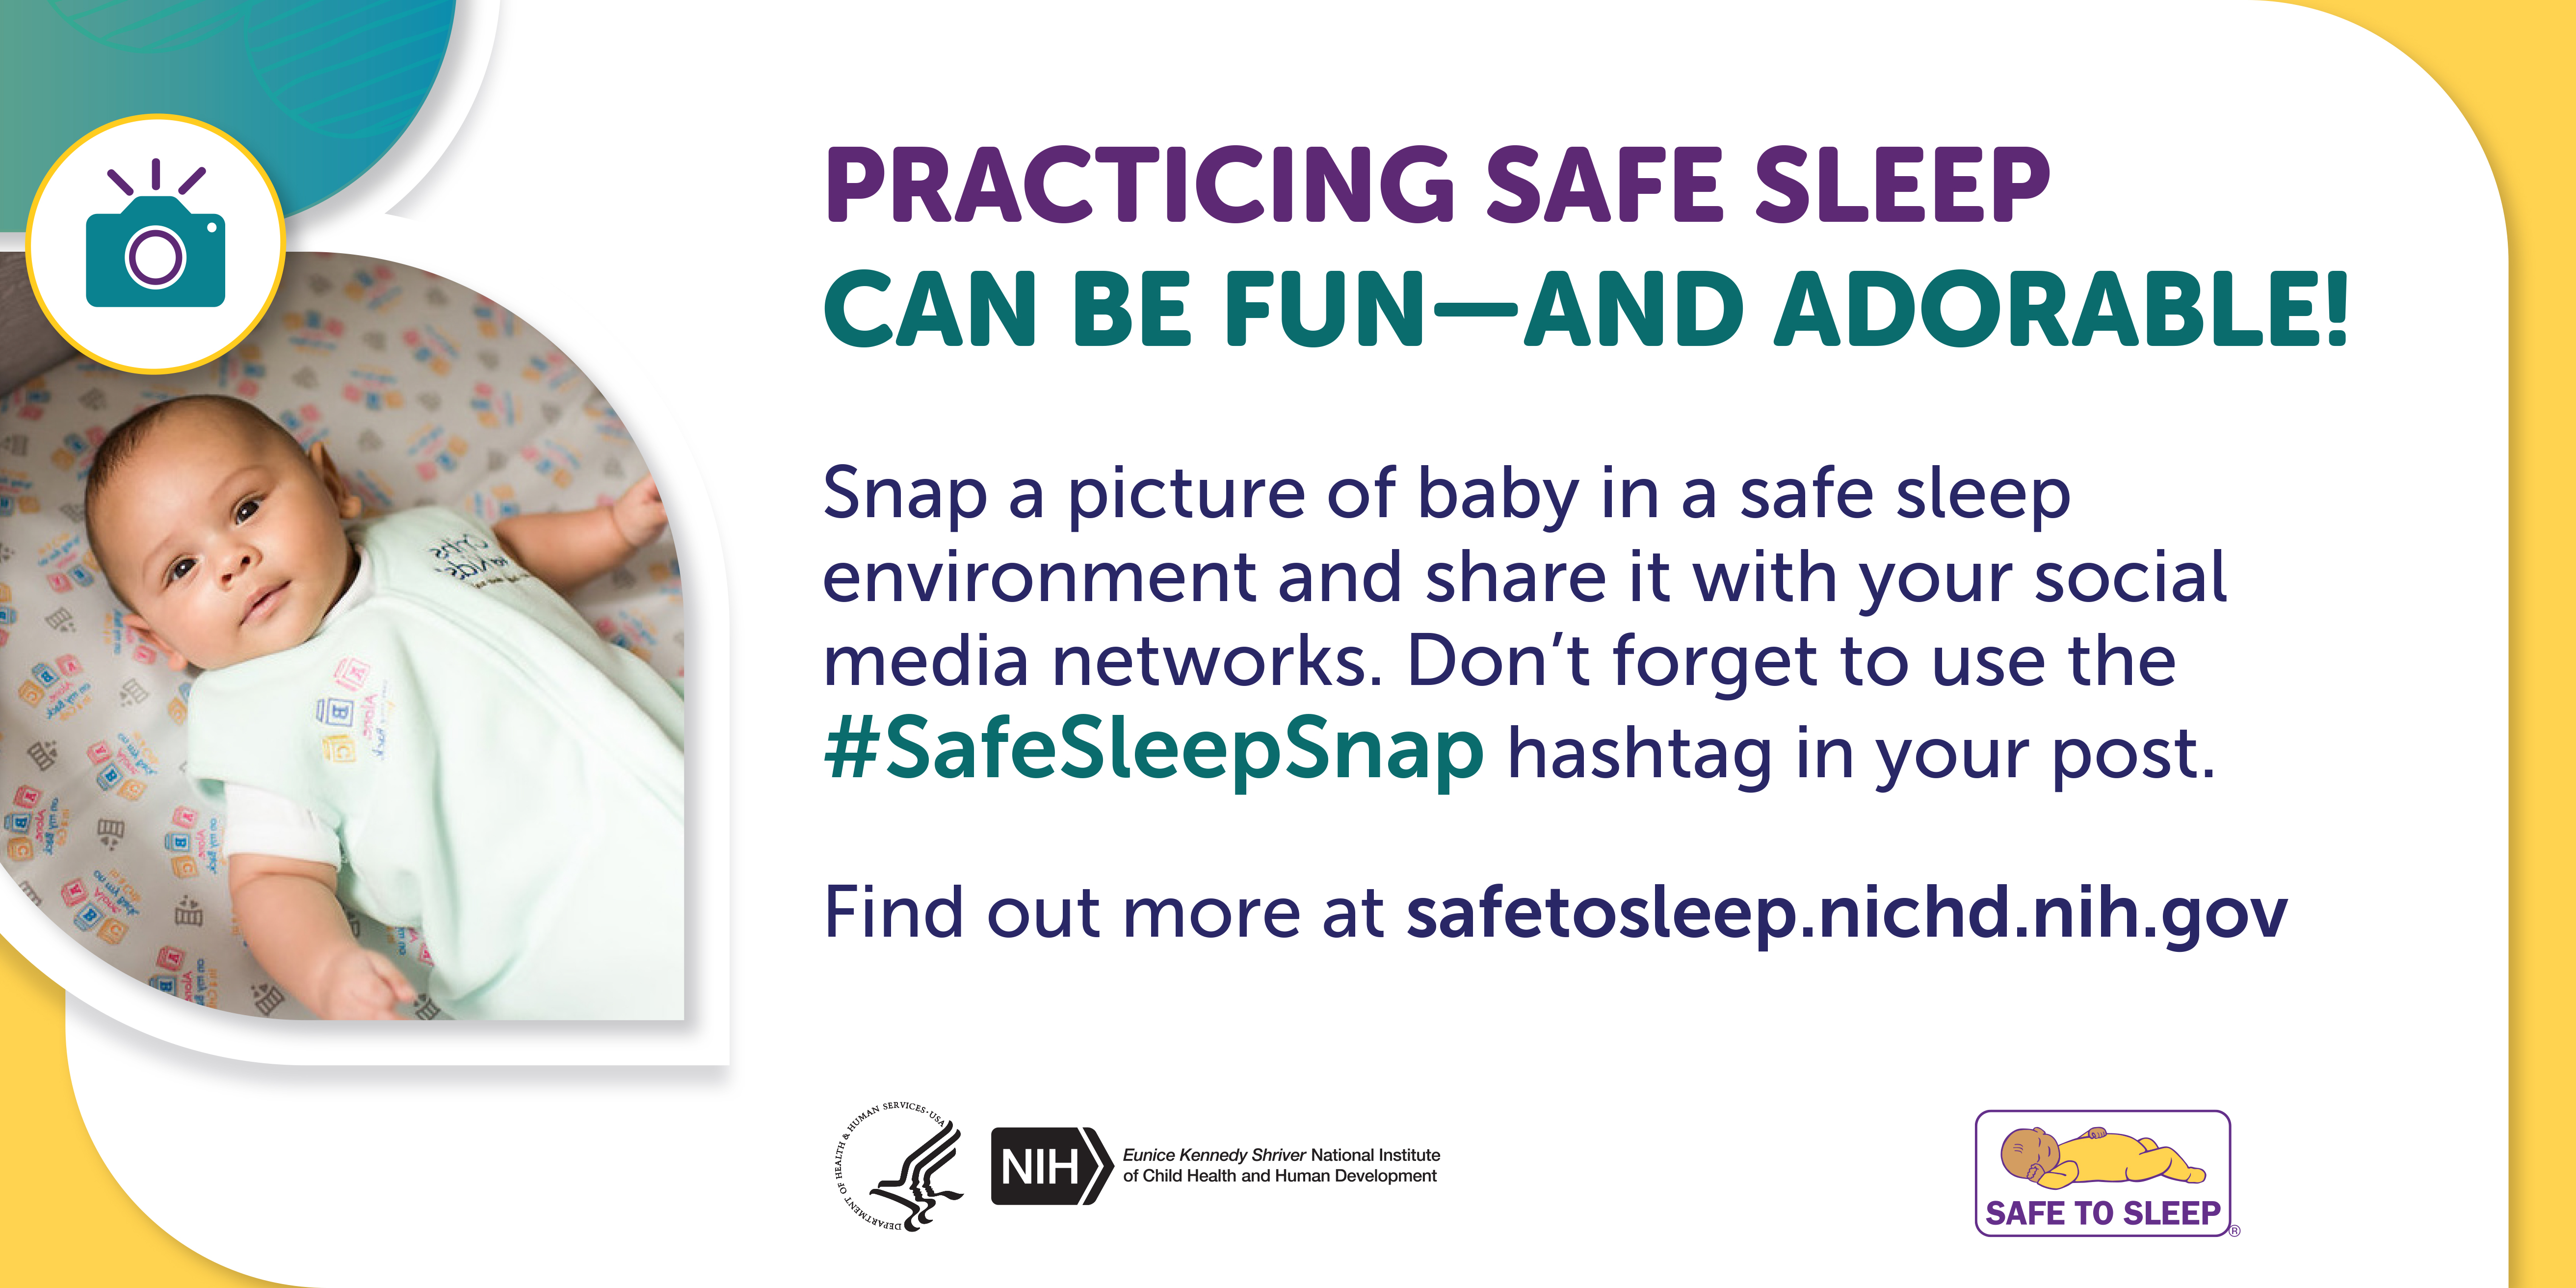 An icon of a camera. Image of a baby lying on their back in an empty crib.  Practicing safe sleep can be fun—and adorable! Snap a picture of baby in a safe sleep environment and share it with your social media networks. Don’t forget to use the Safe Sleep Snap hashtag in your post. Find out more at safetosleep.nichd.nih.gov. Seal of the U.S. Department of Health and Human Services. Logo of the Eunice Kennedy Shriver National Institute of Child Health and Human Development. Safe to Sleep logo.